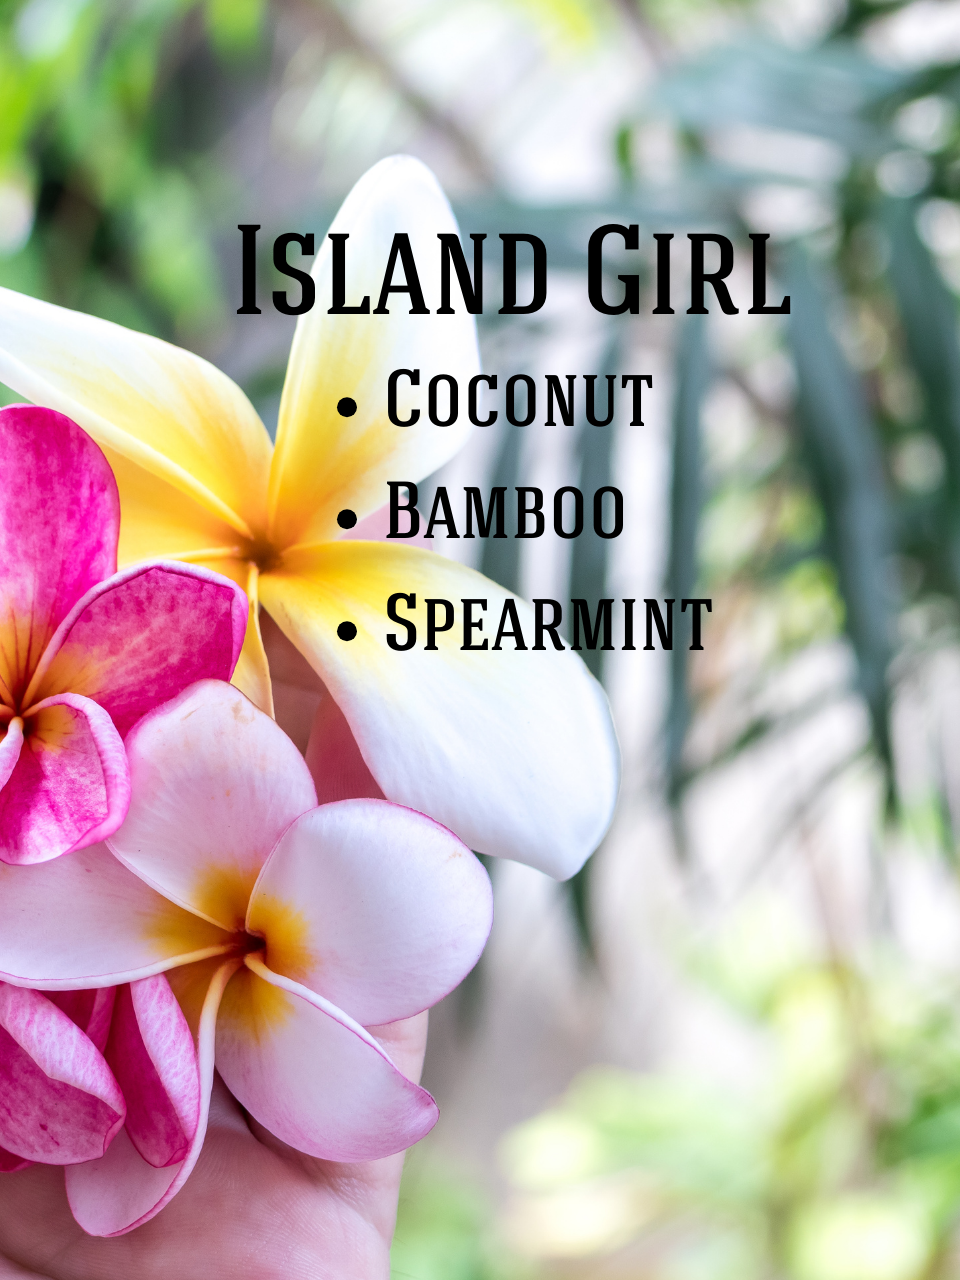 NEW! Island Girl Soy Candle: Toasted Coconut, Bamboo, Spearmint